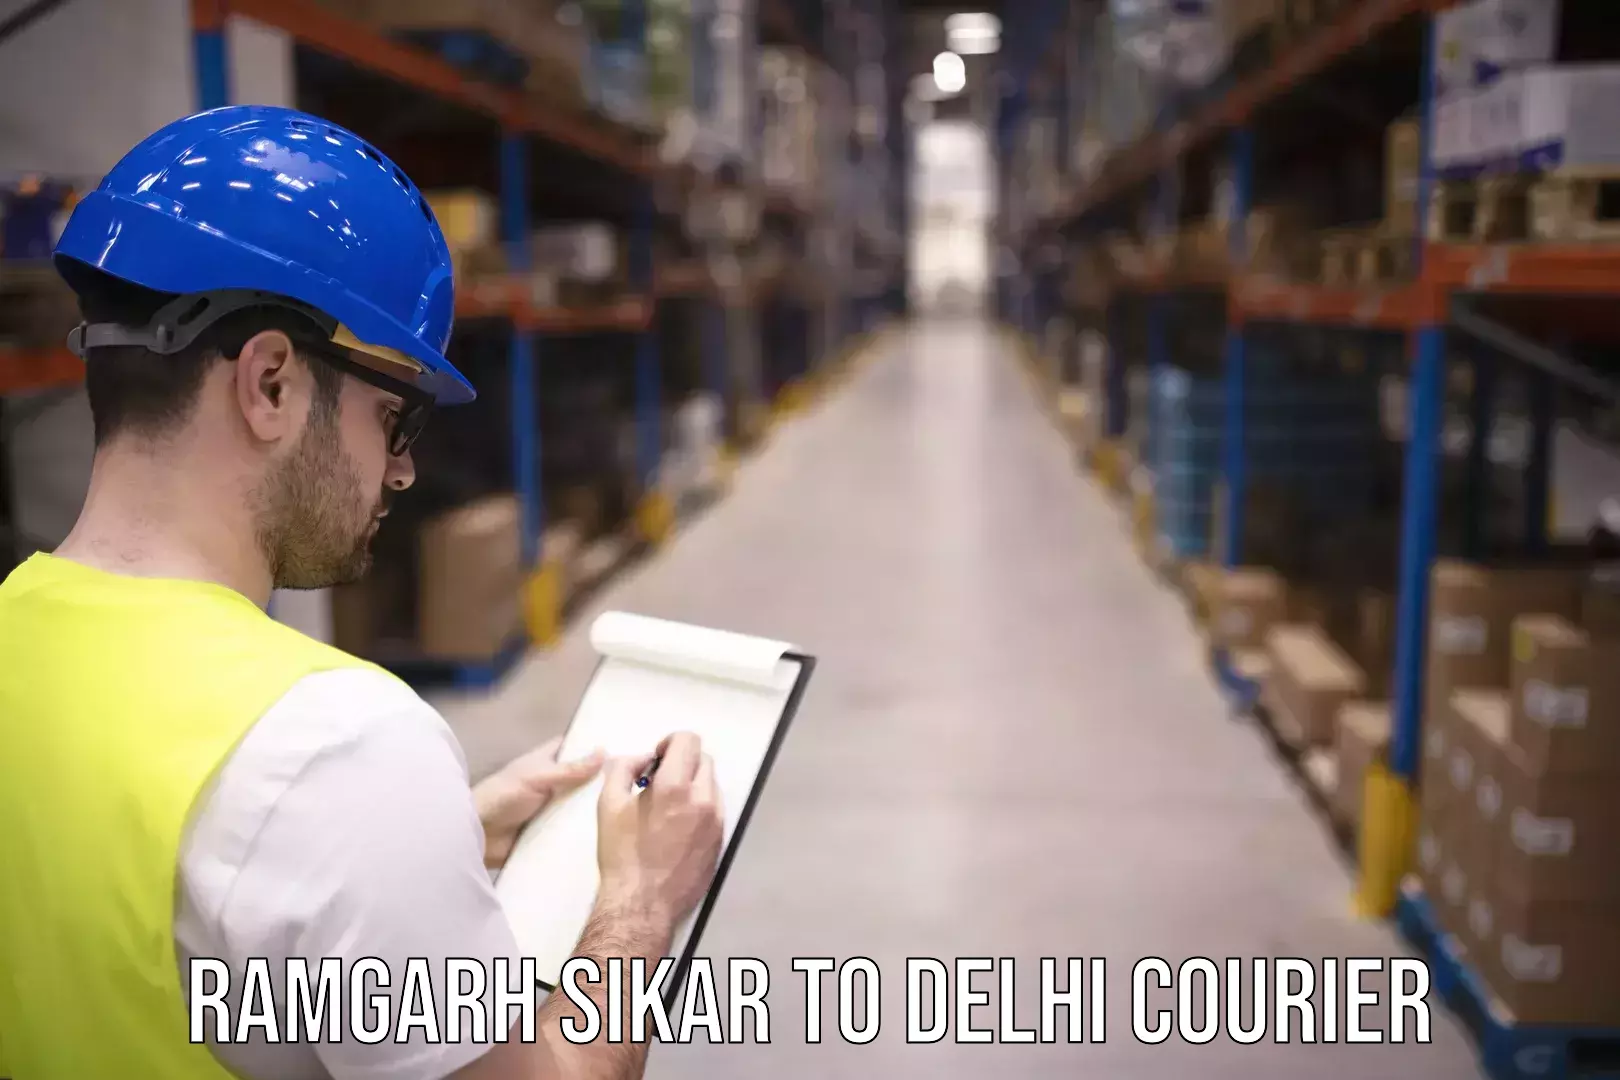 State-of-the-art courier technology Ramgarh Sikar to IIT Delhi